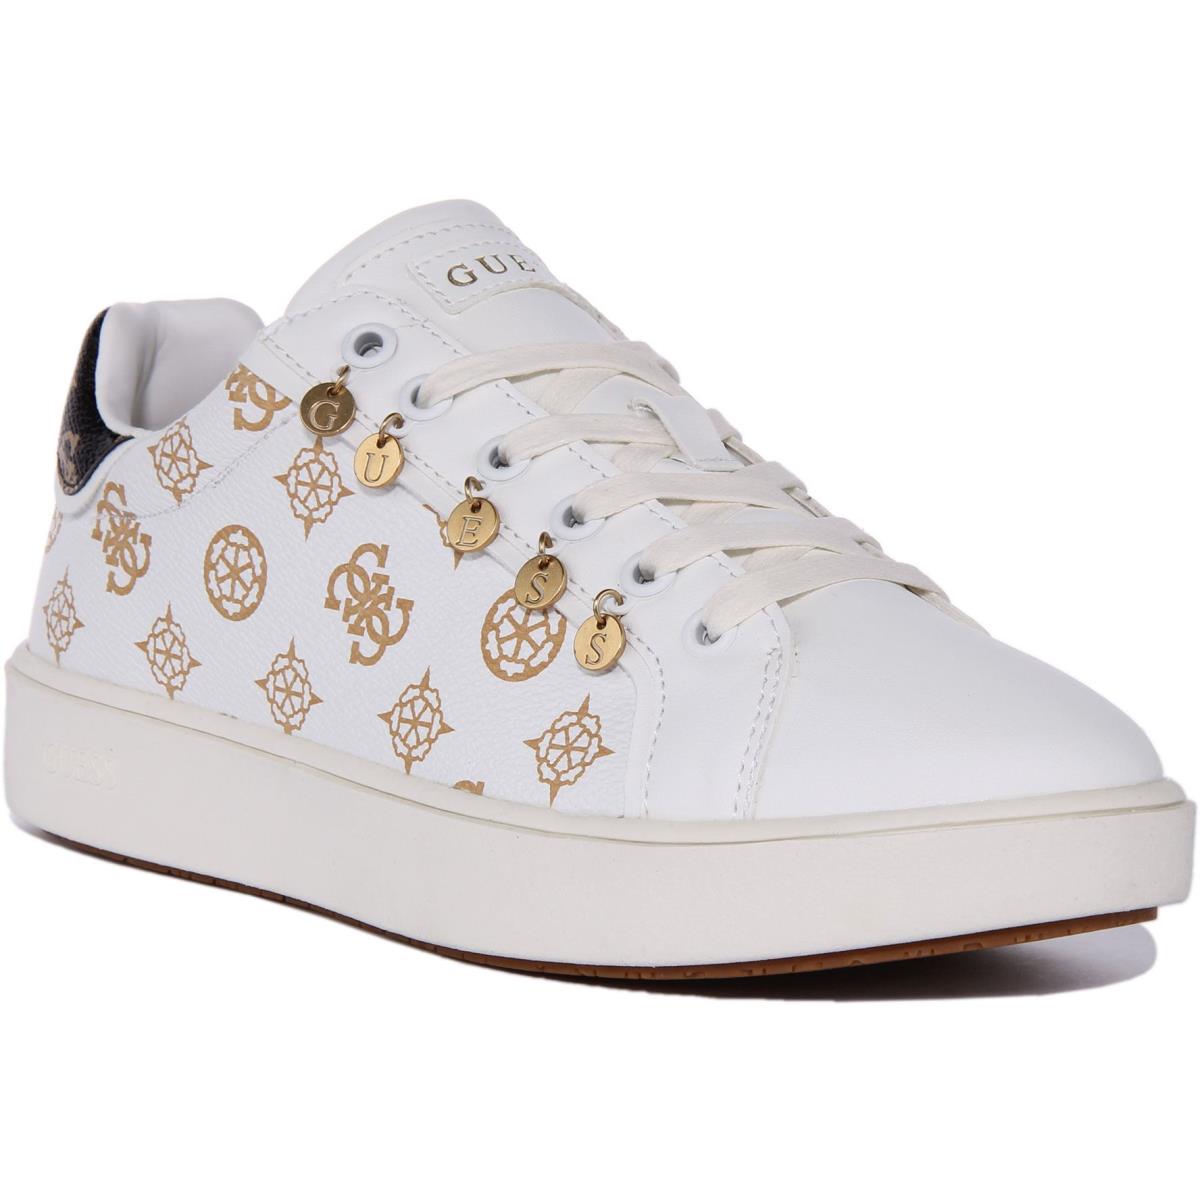 Guess Fl5Melfal12 Mely Womens Lace Up Low Sneaker In White Gold US Size 5 - 10 WHITE GOLD